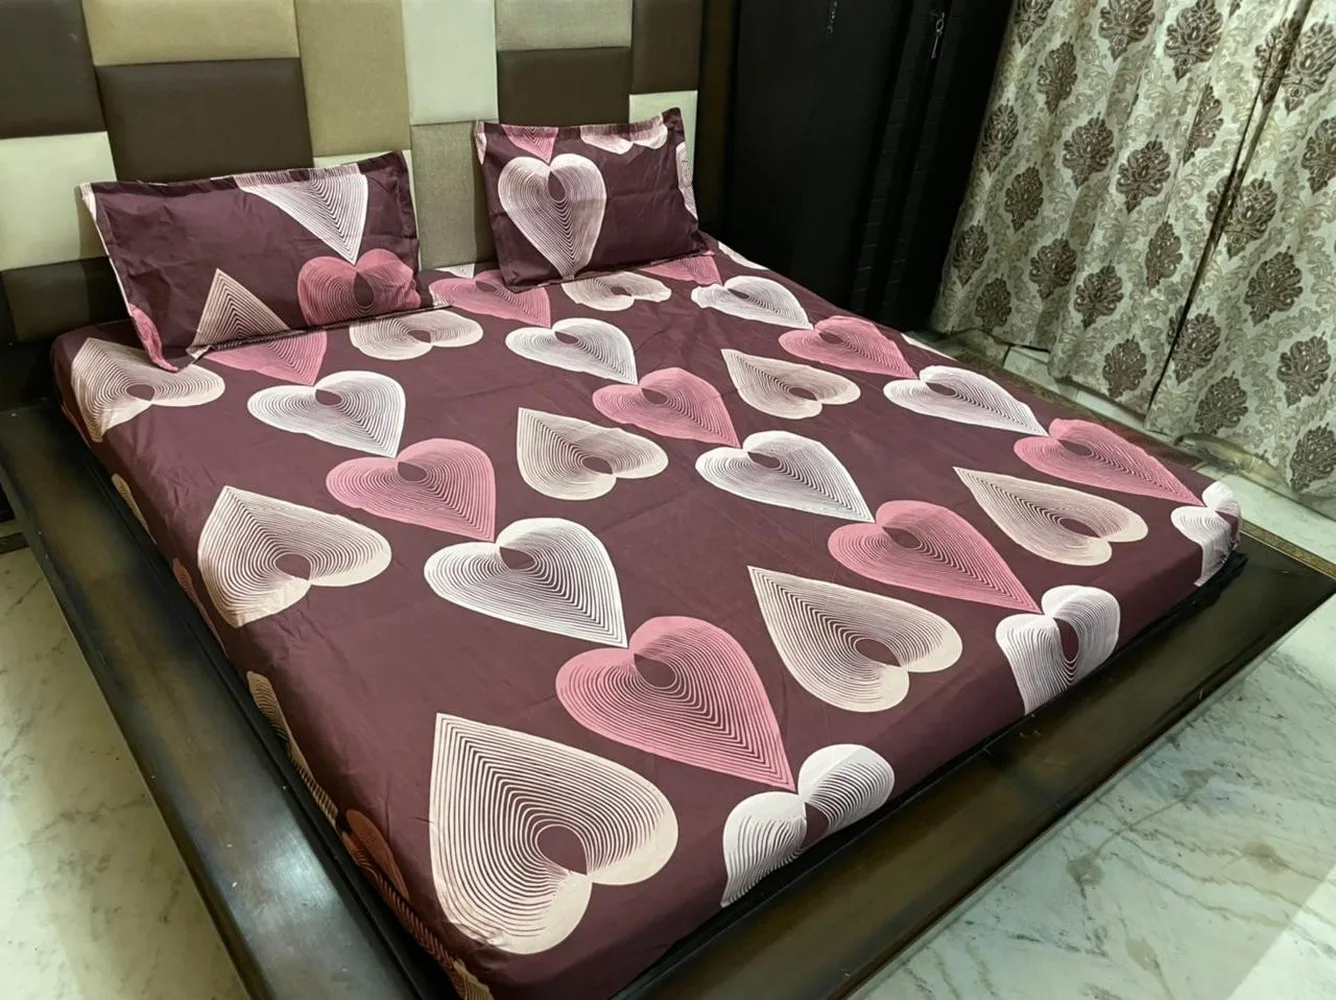 bedsheet printed, fitted, elastic corner, 90x100, glace cotton, 2 pillow covers, maroon heart design